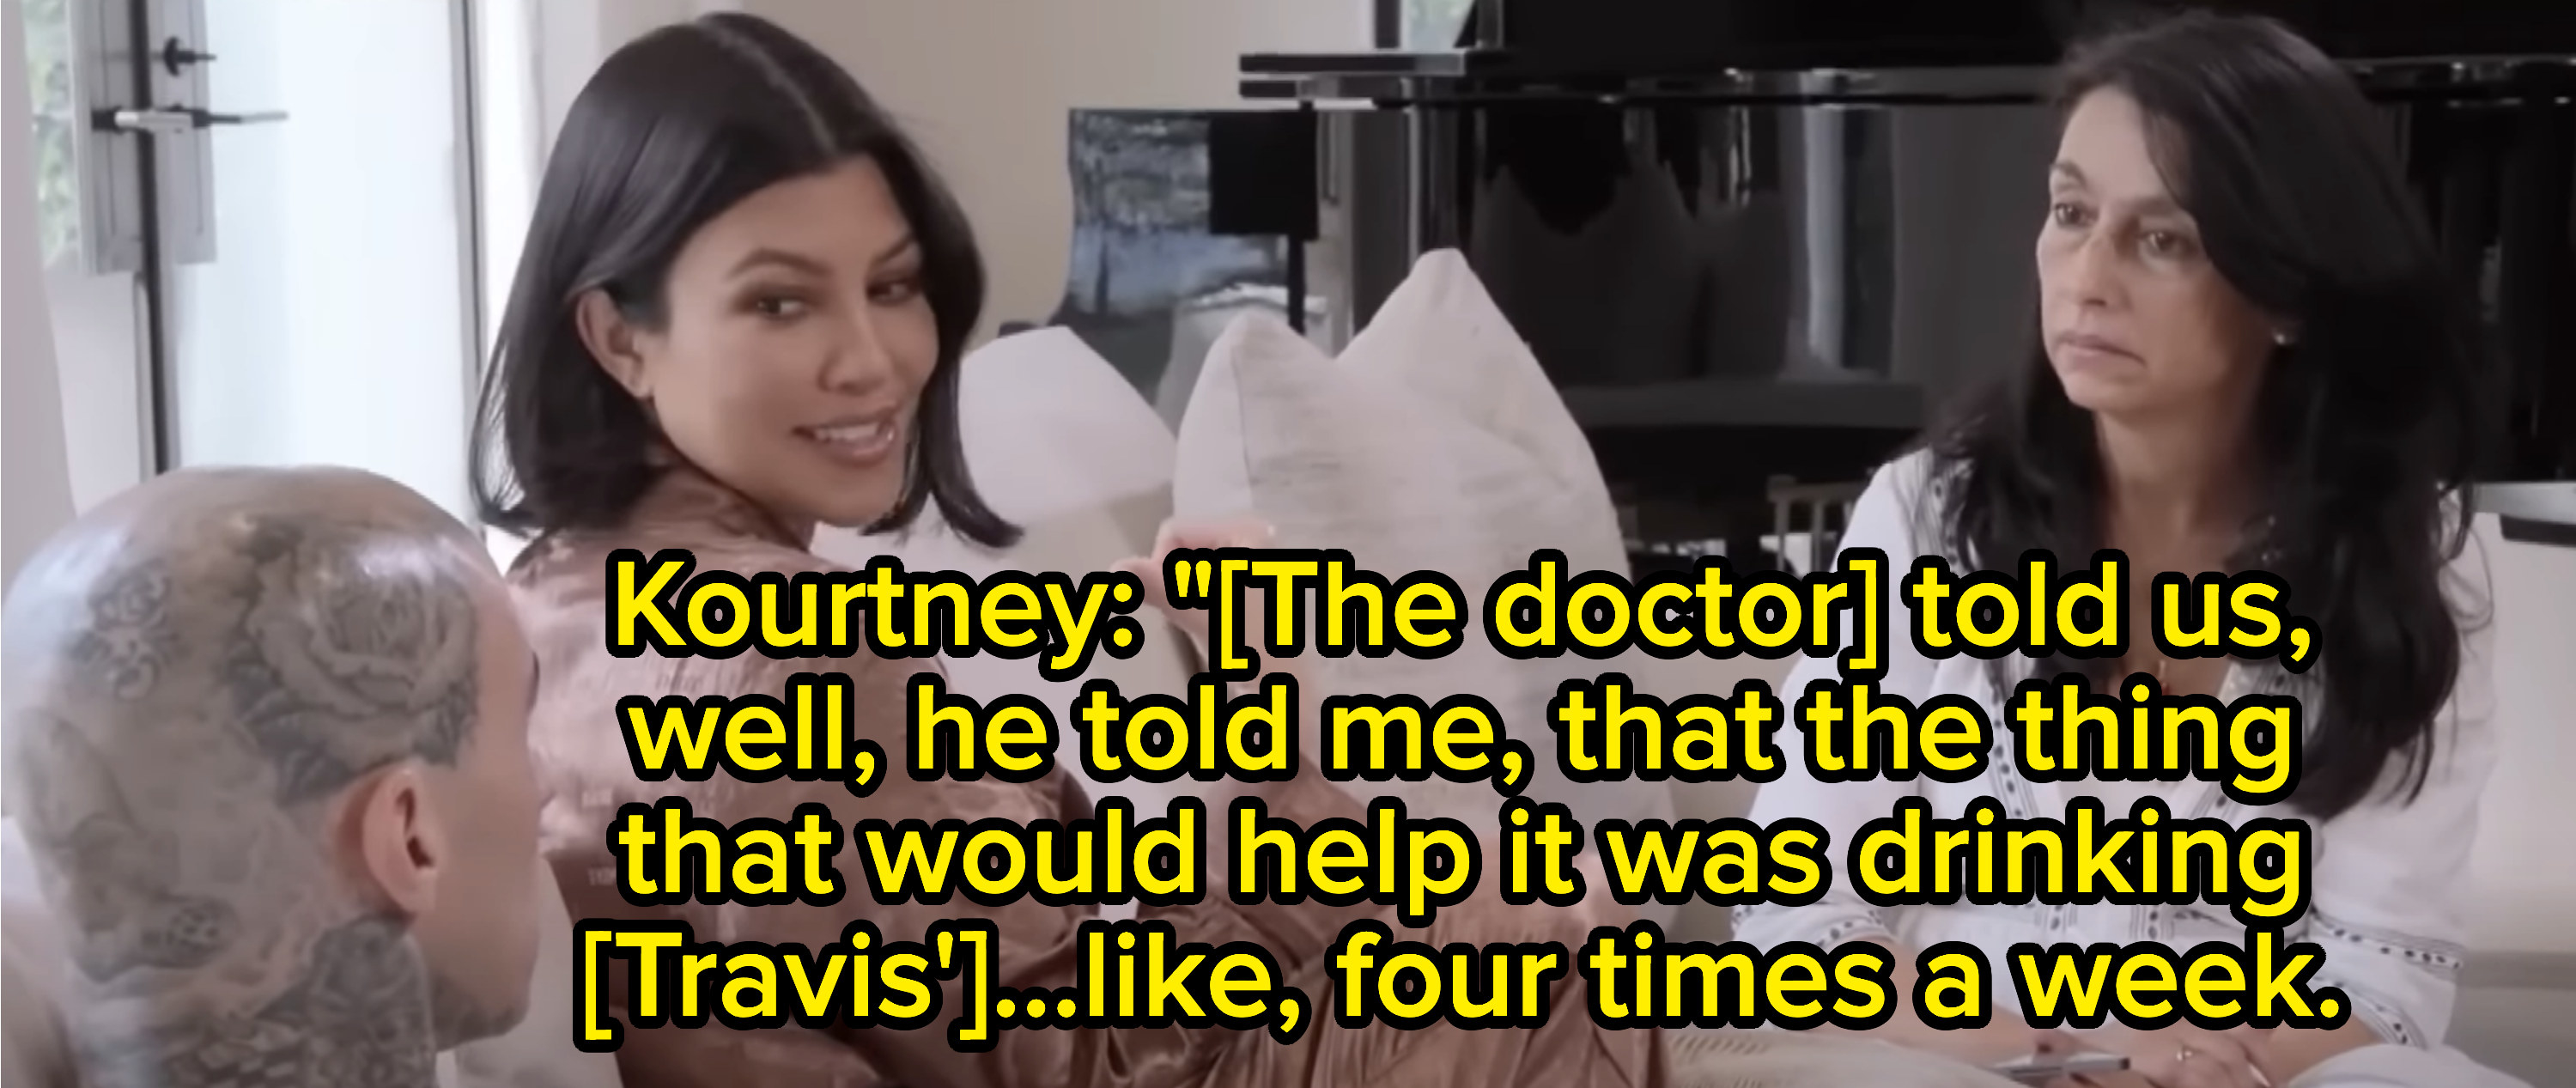 Kourtney explaining what the doctor told them to do